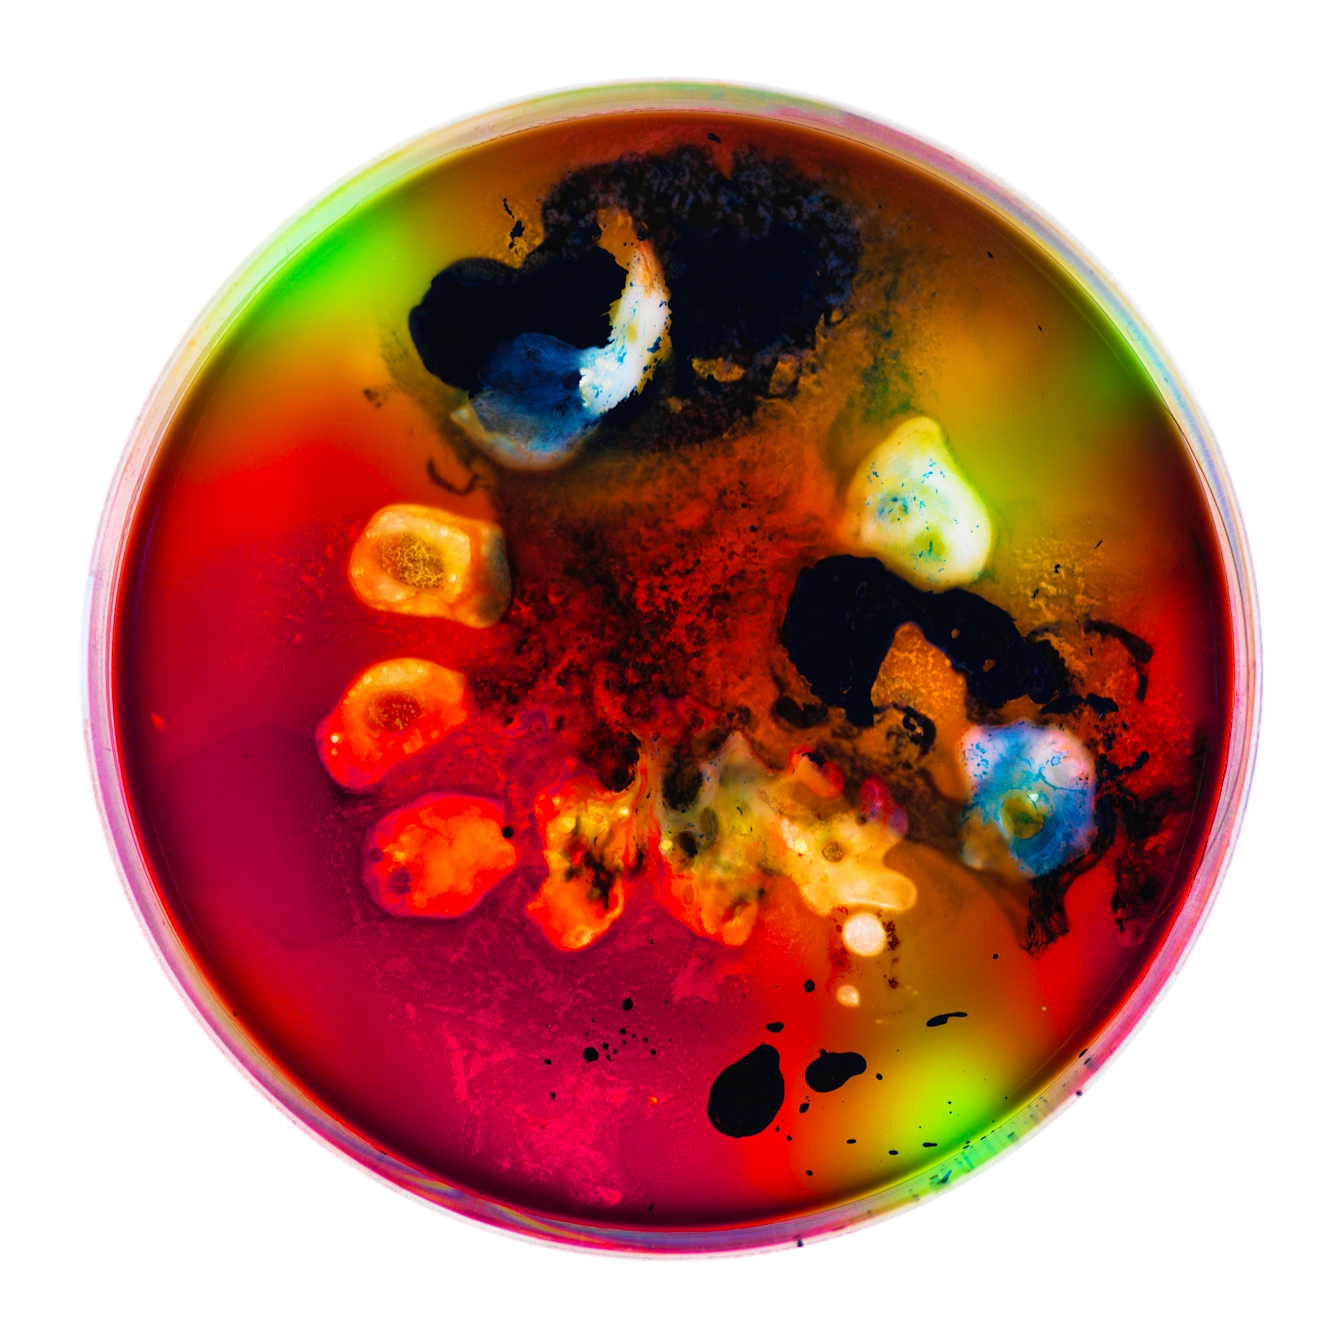 Photograph of a petri dish containing colourful swirls and blotches of blue, yellow, orange, red, green and black spots, made from ink, watercolour, pva and resin.